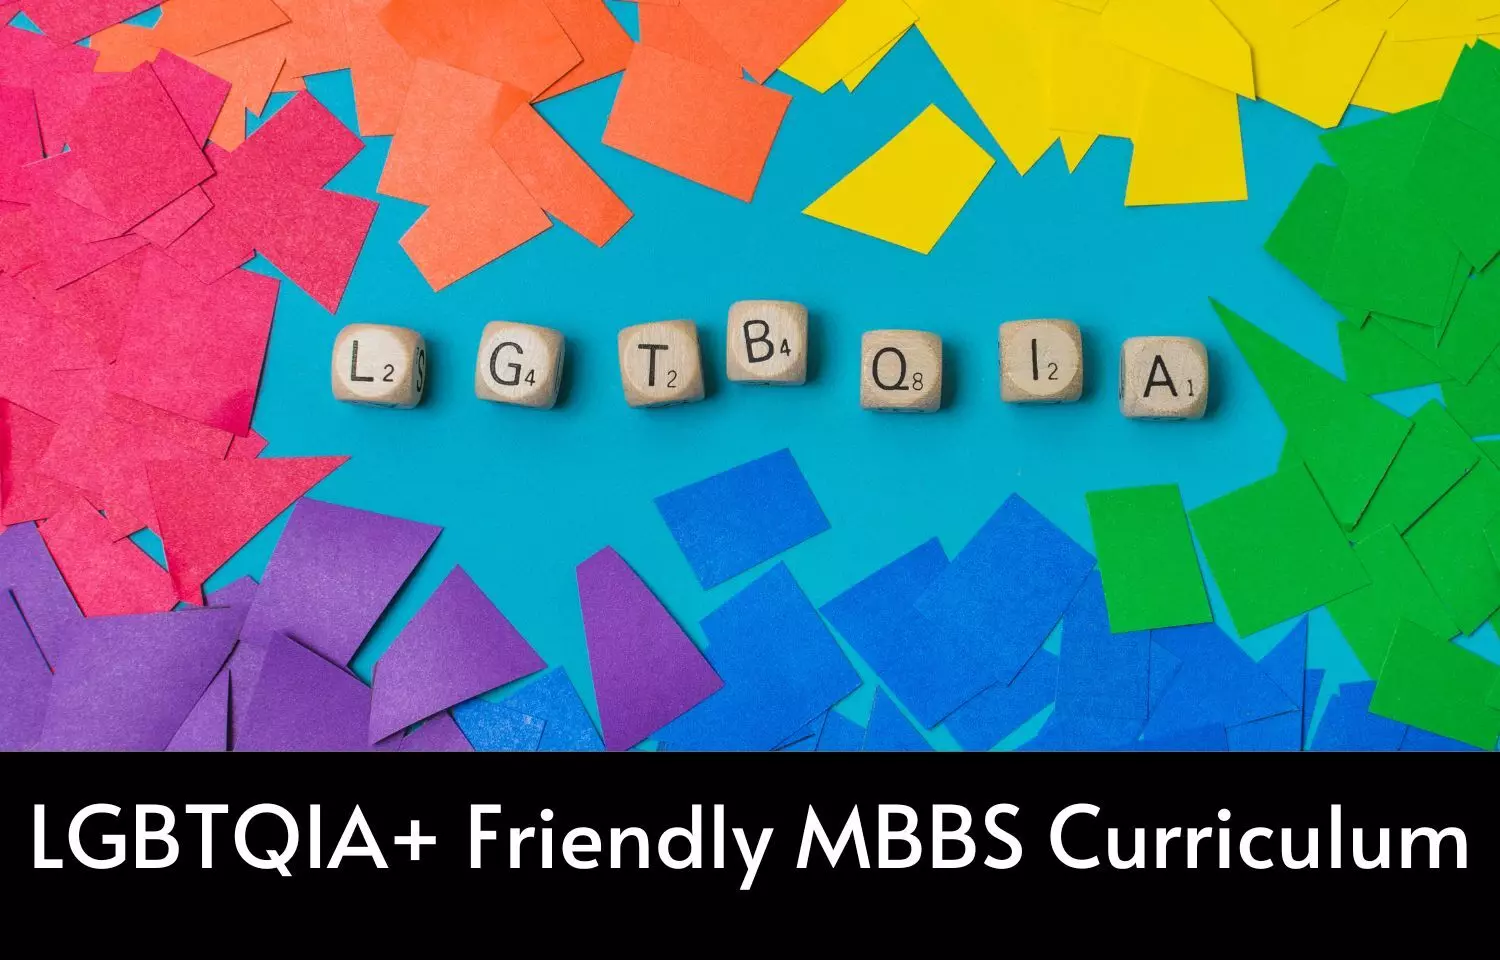 LGBTQIA+ friendly MBBS curriculum: Here is what the NMCs expert committee recommends